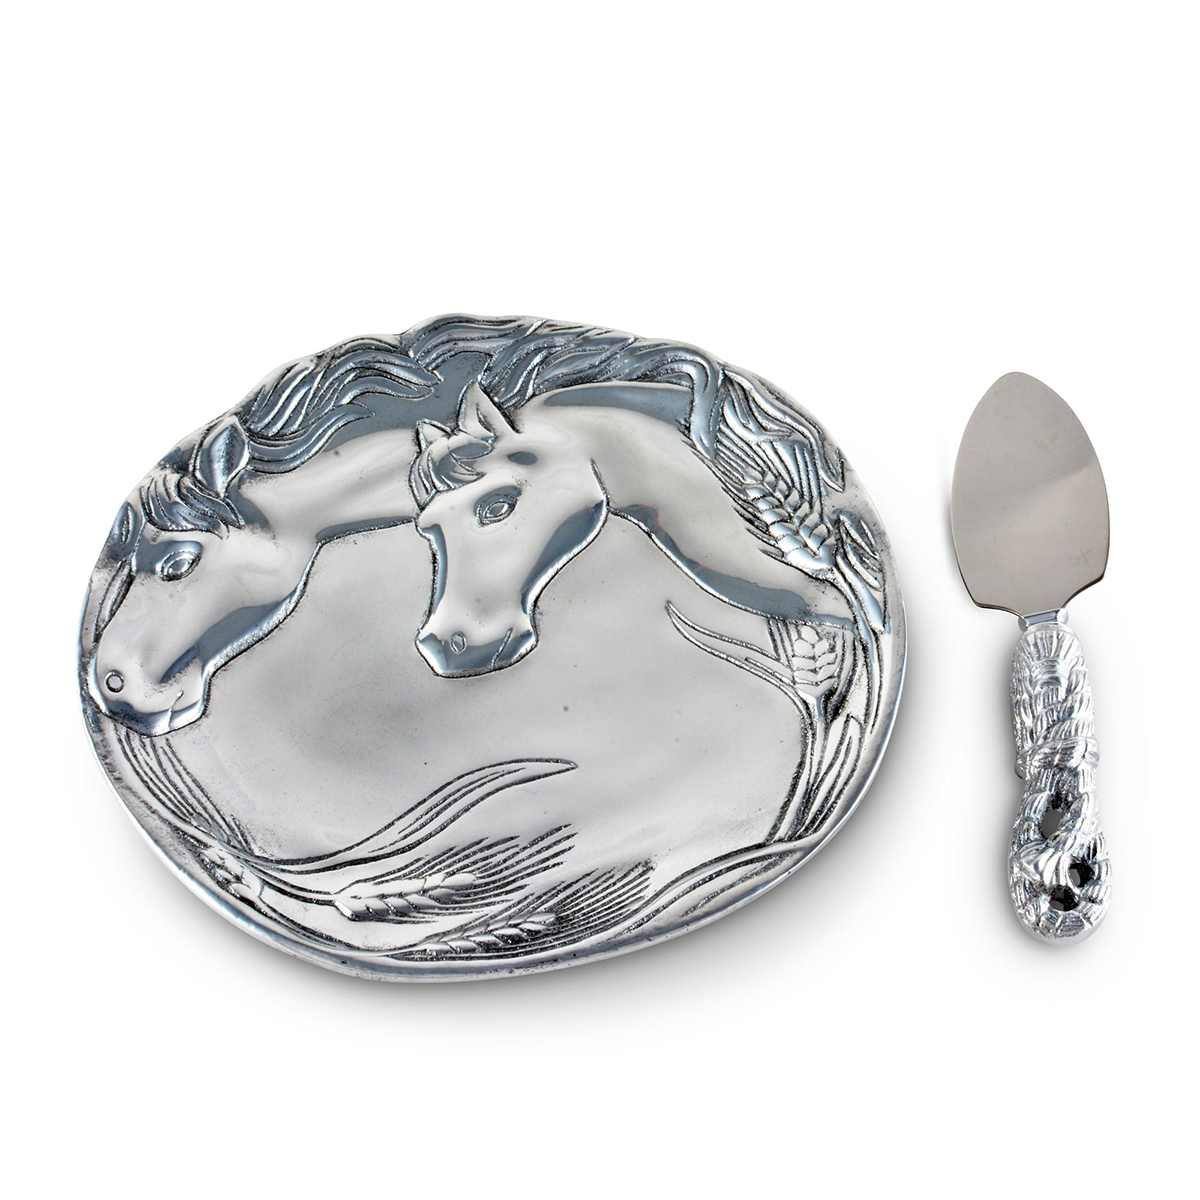 Arthur Court Equestrian Horse Plate with Server